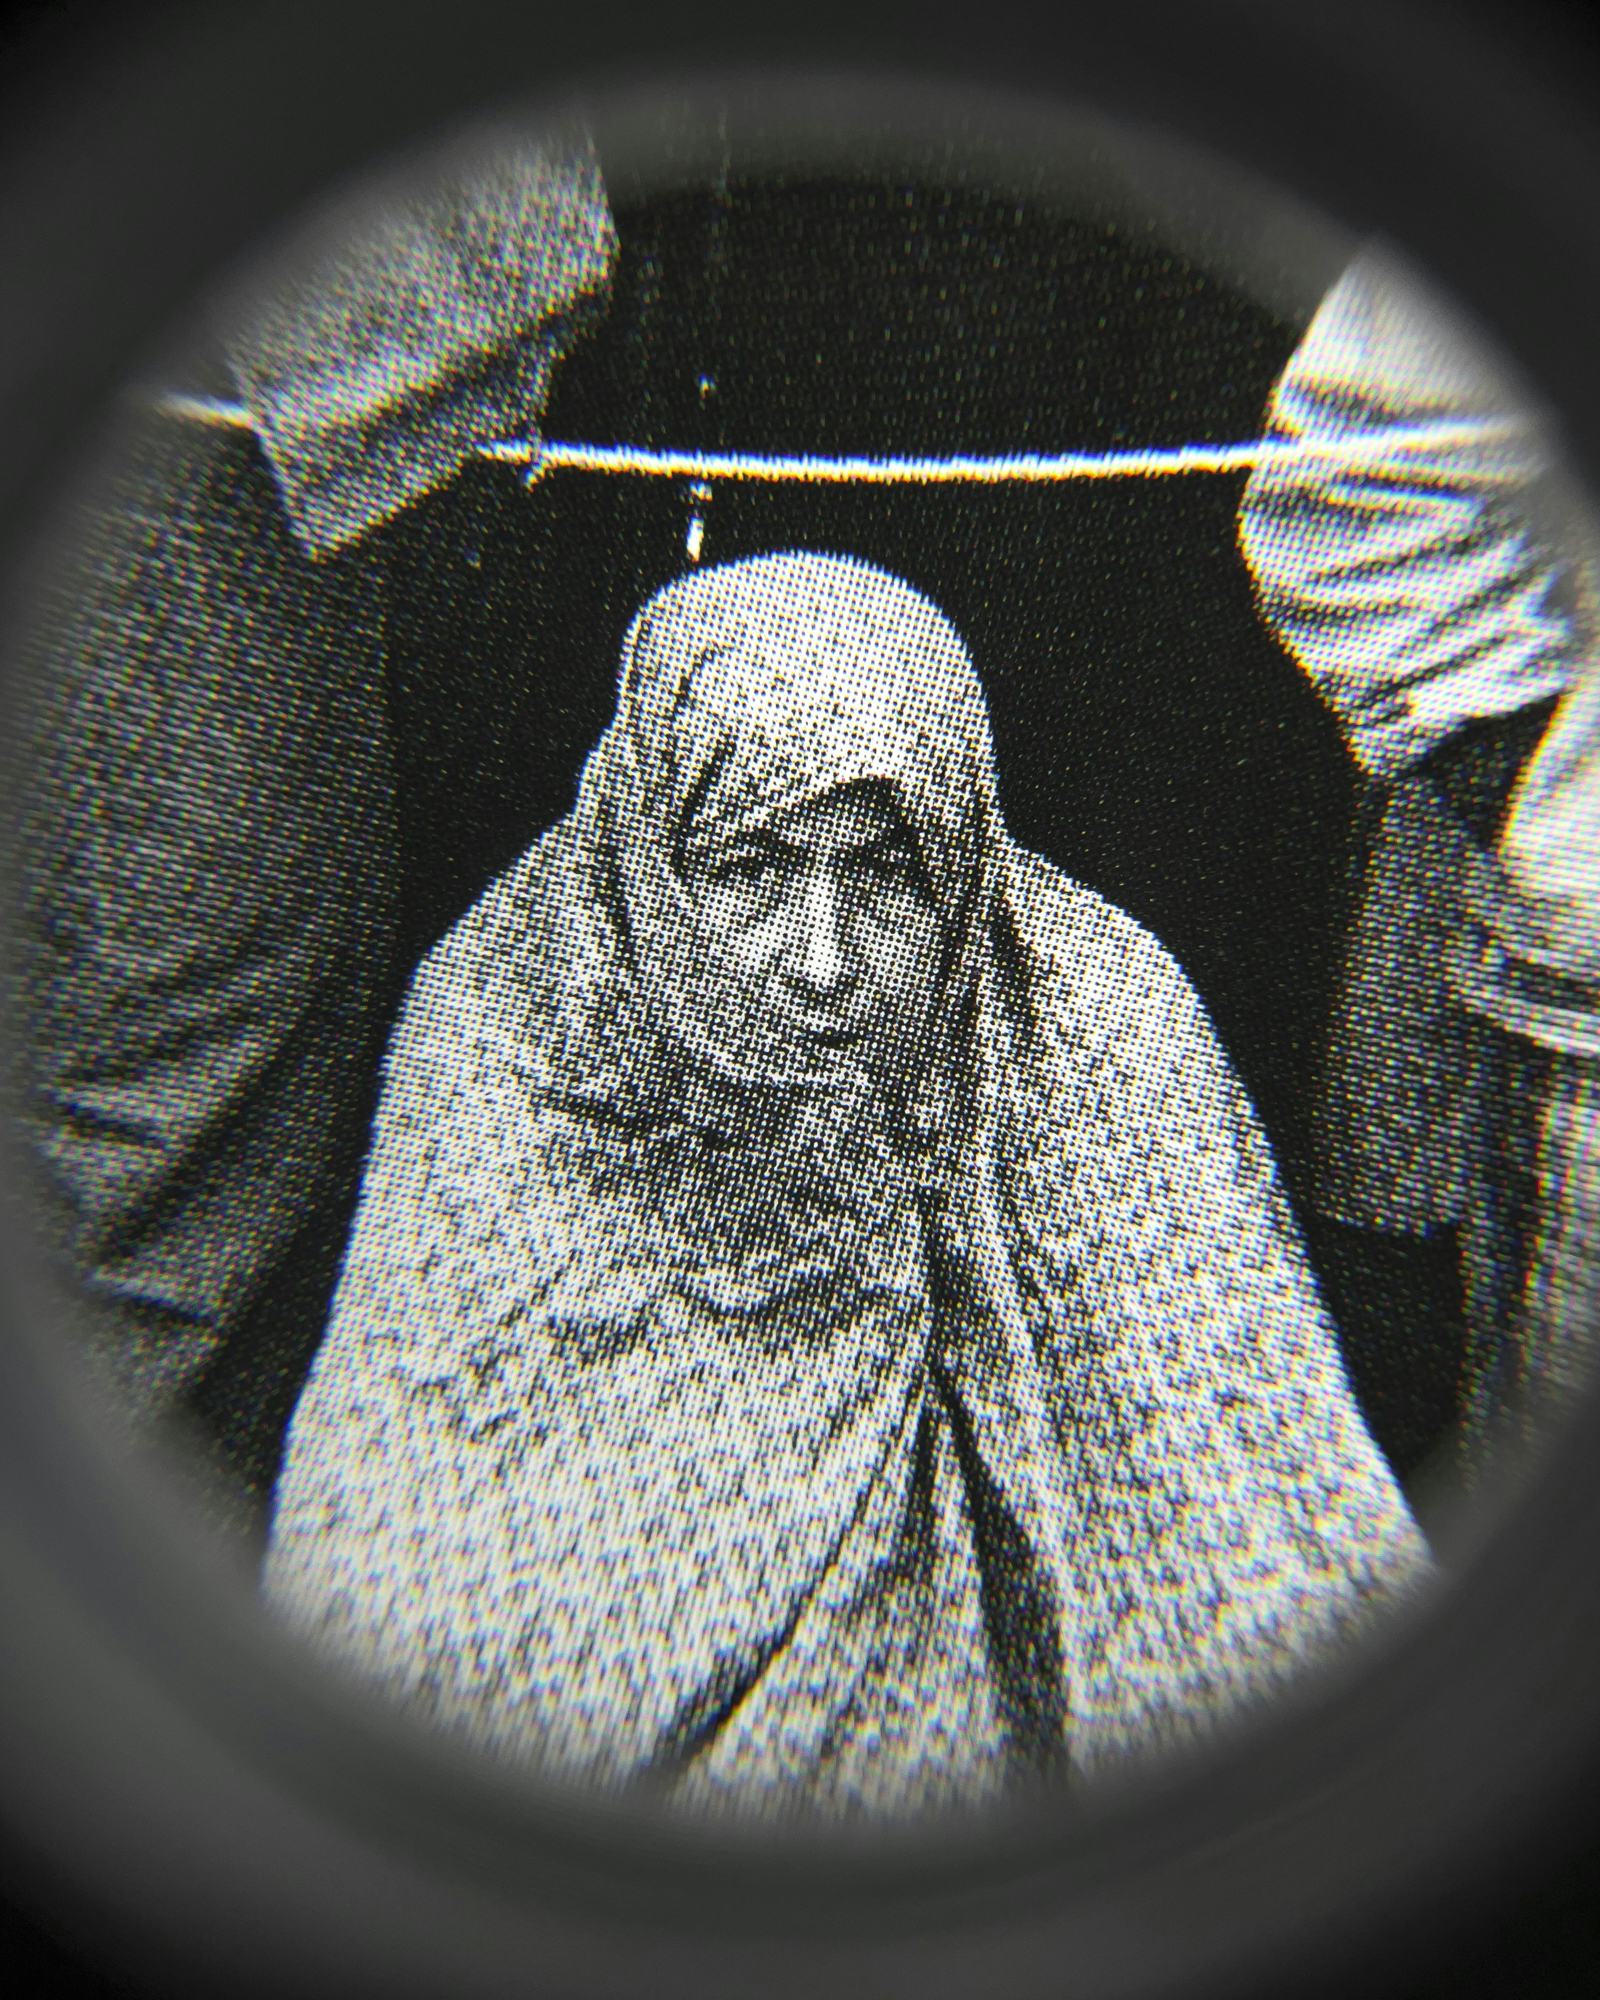 Black and white close-up image of an existing photograph, showing a woman wearing a chador, staring into the camera. Shot through a magnifying lens © Amin Yousefi